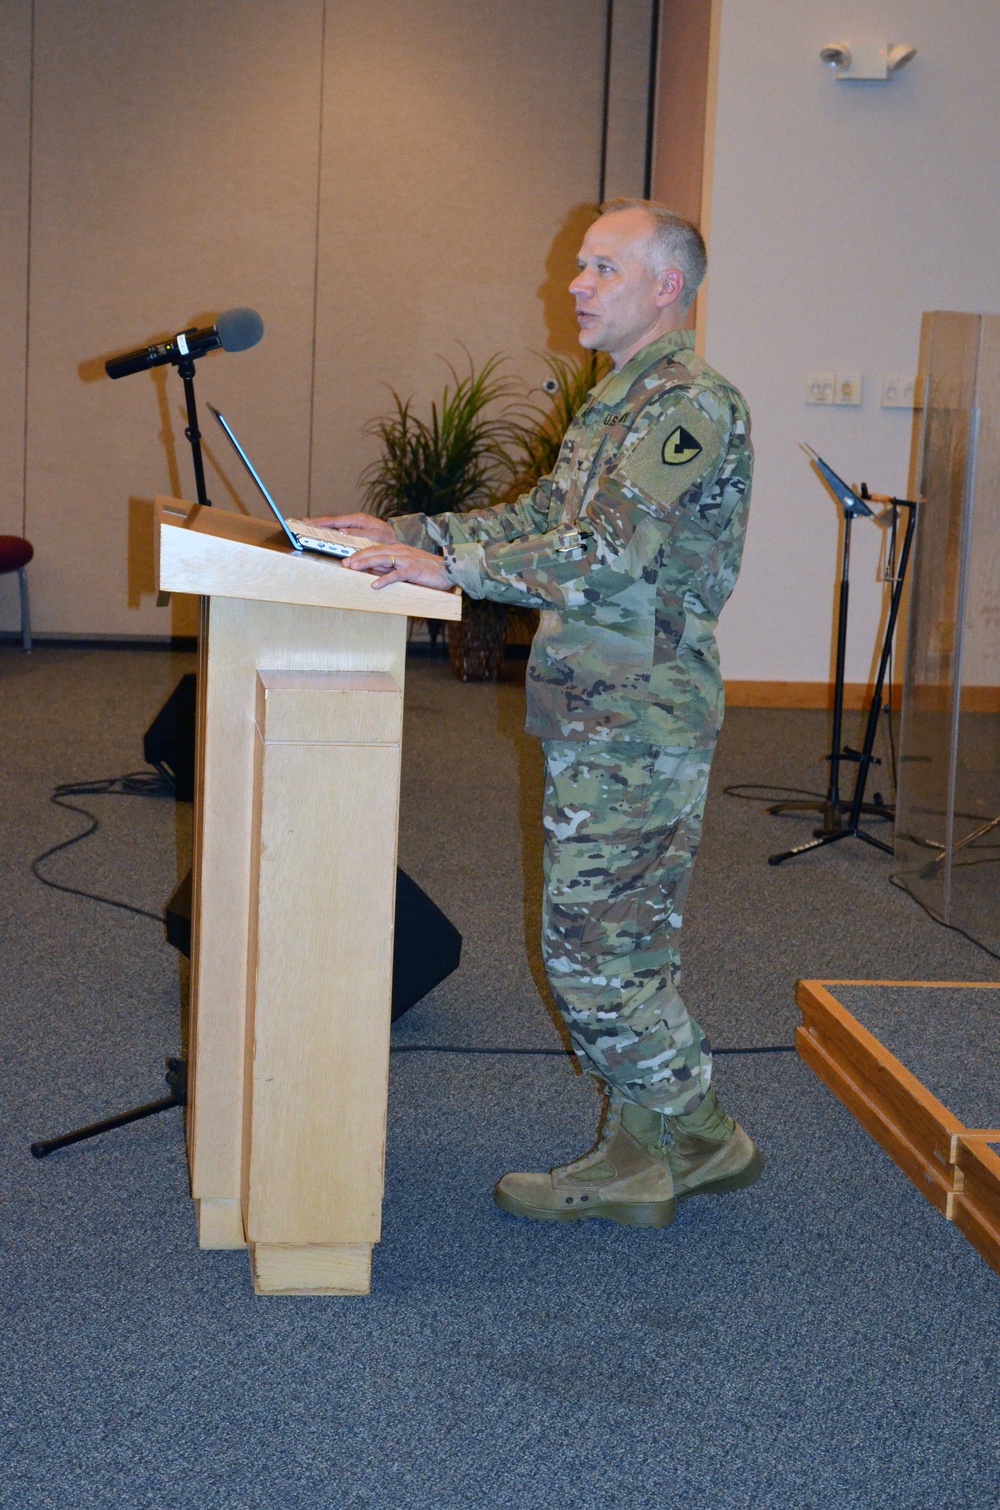 The chaplains of U.S. Army Garrison Alaska, Fort Wainwright, celebrate the 244th anniversary of the Chaplain Corps at the Northern Lights Chapel aboard Fort Wainwright